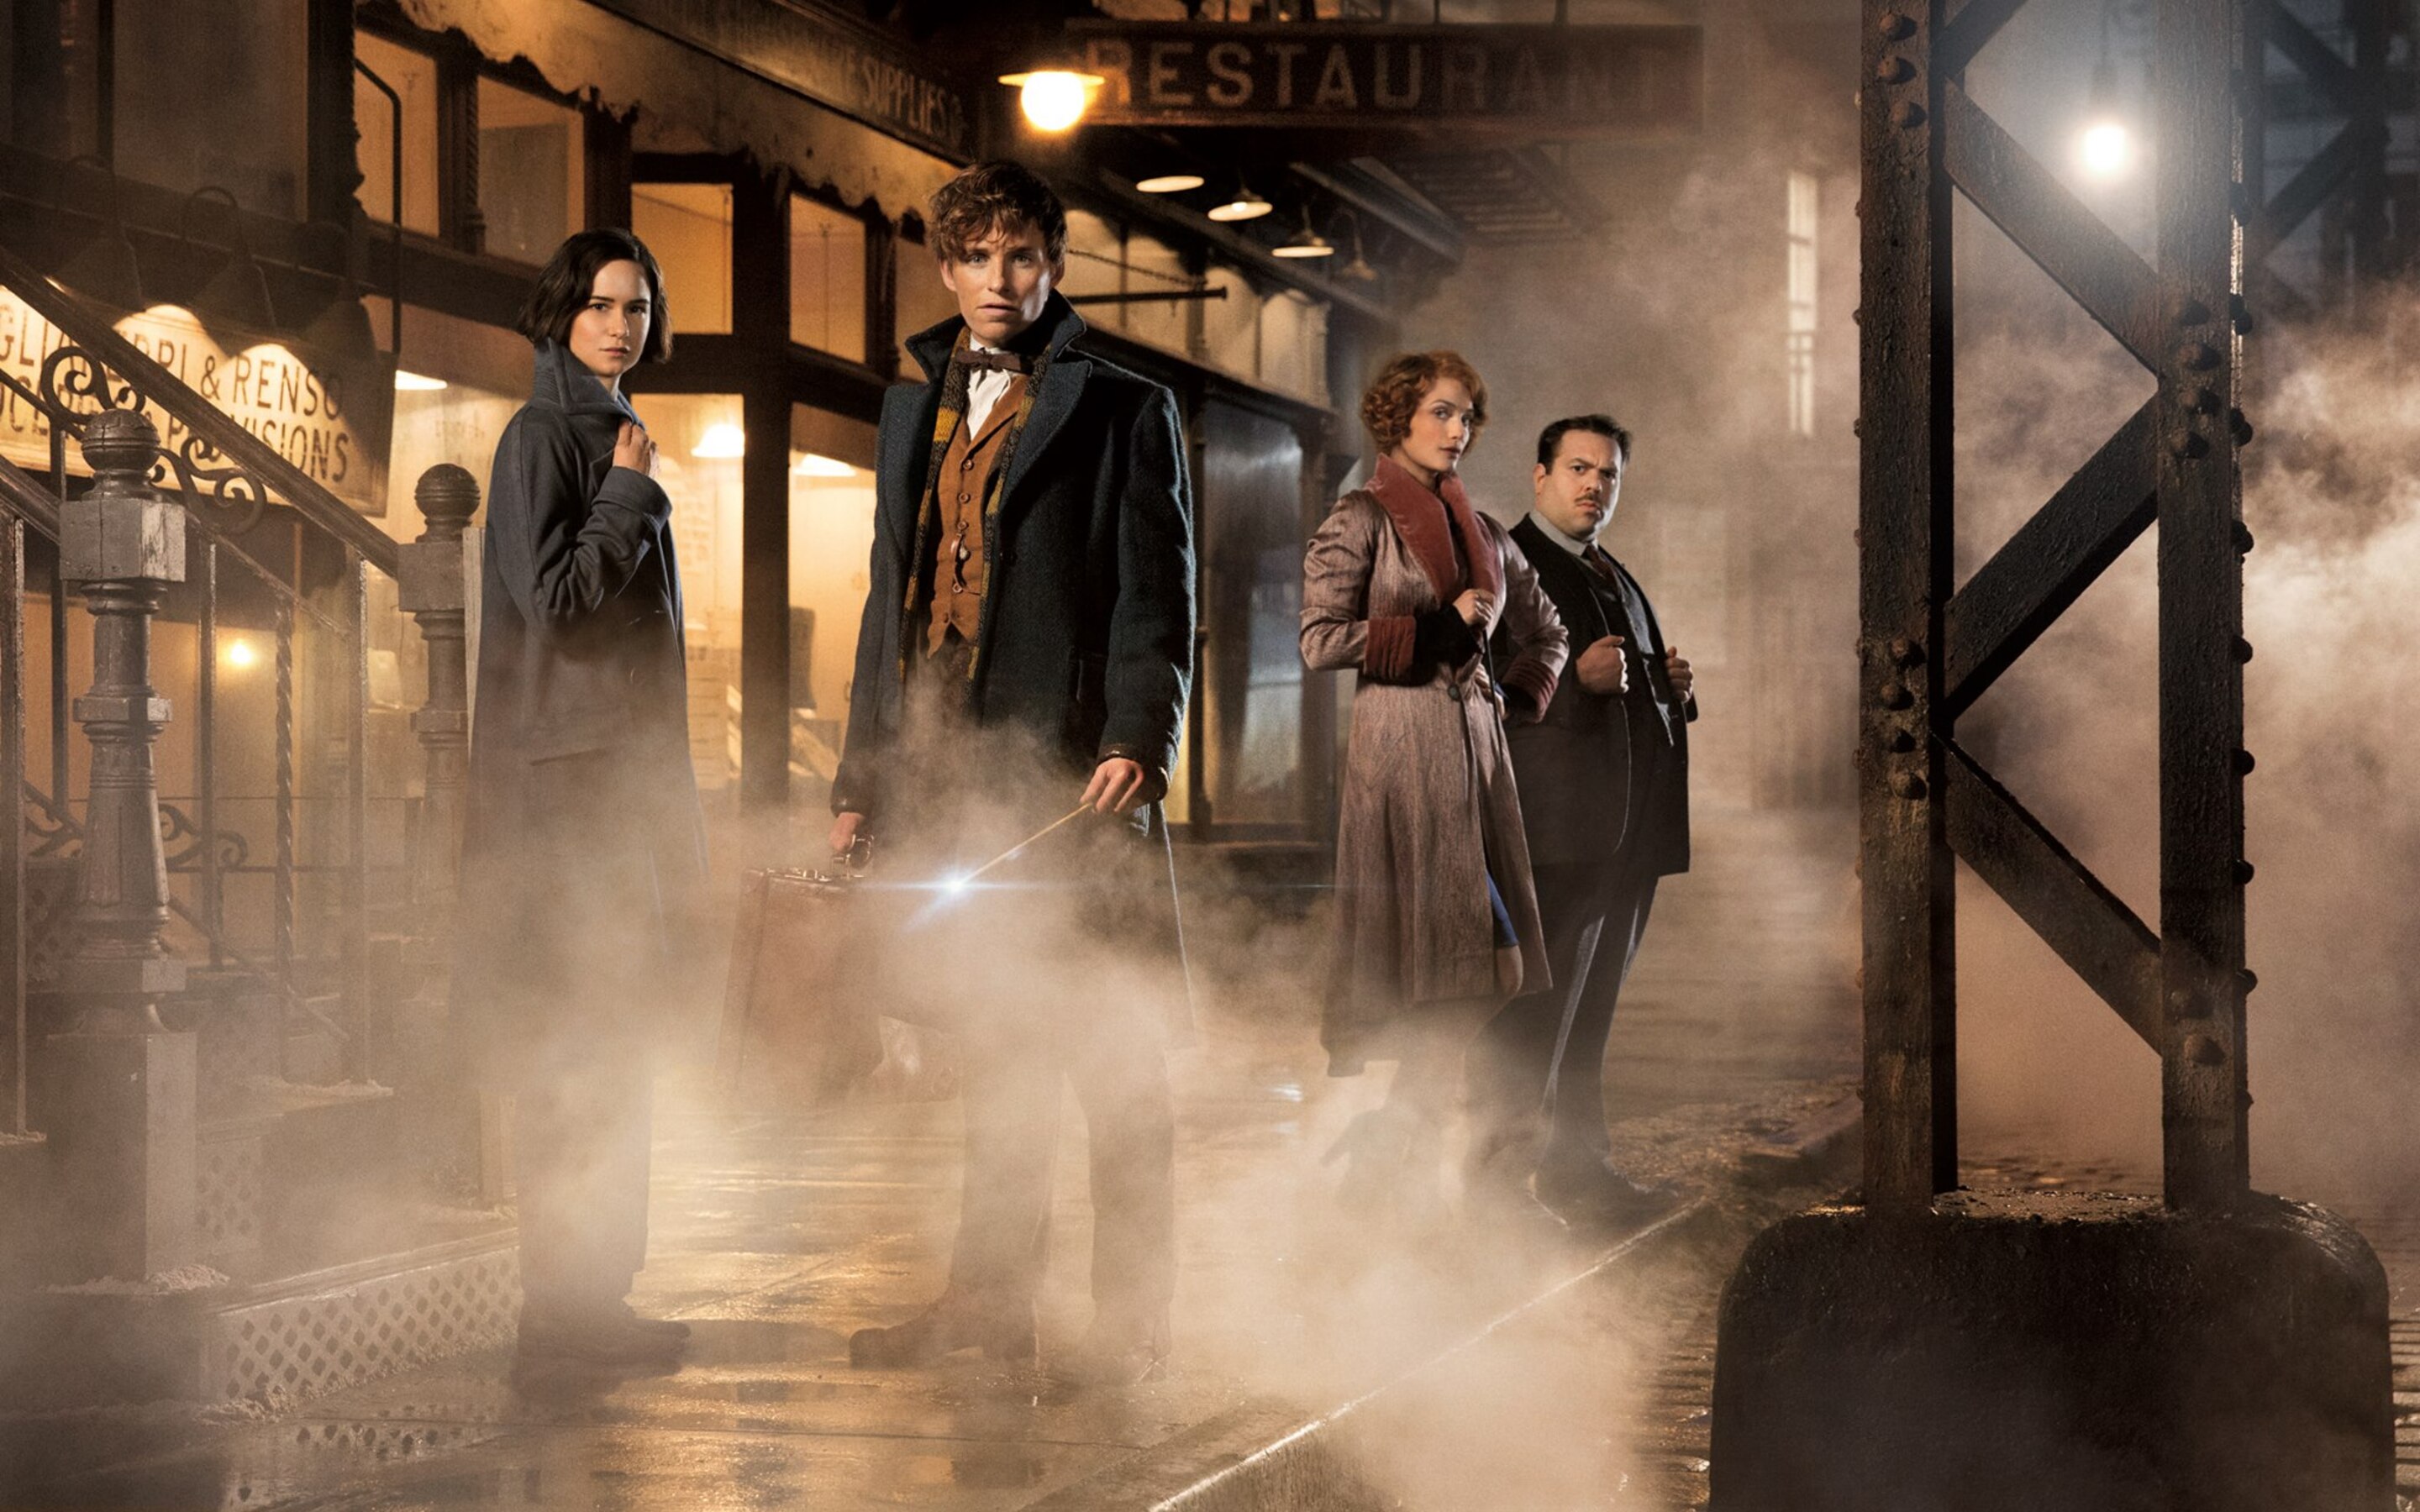 Fantastic Beasts And Where To Find Them Watch Official Trailer Online 2016